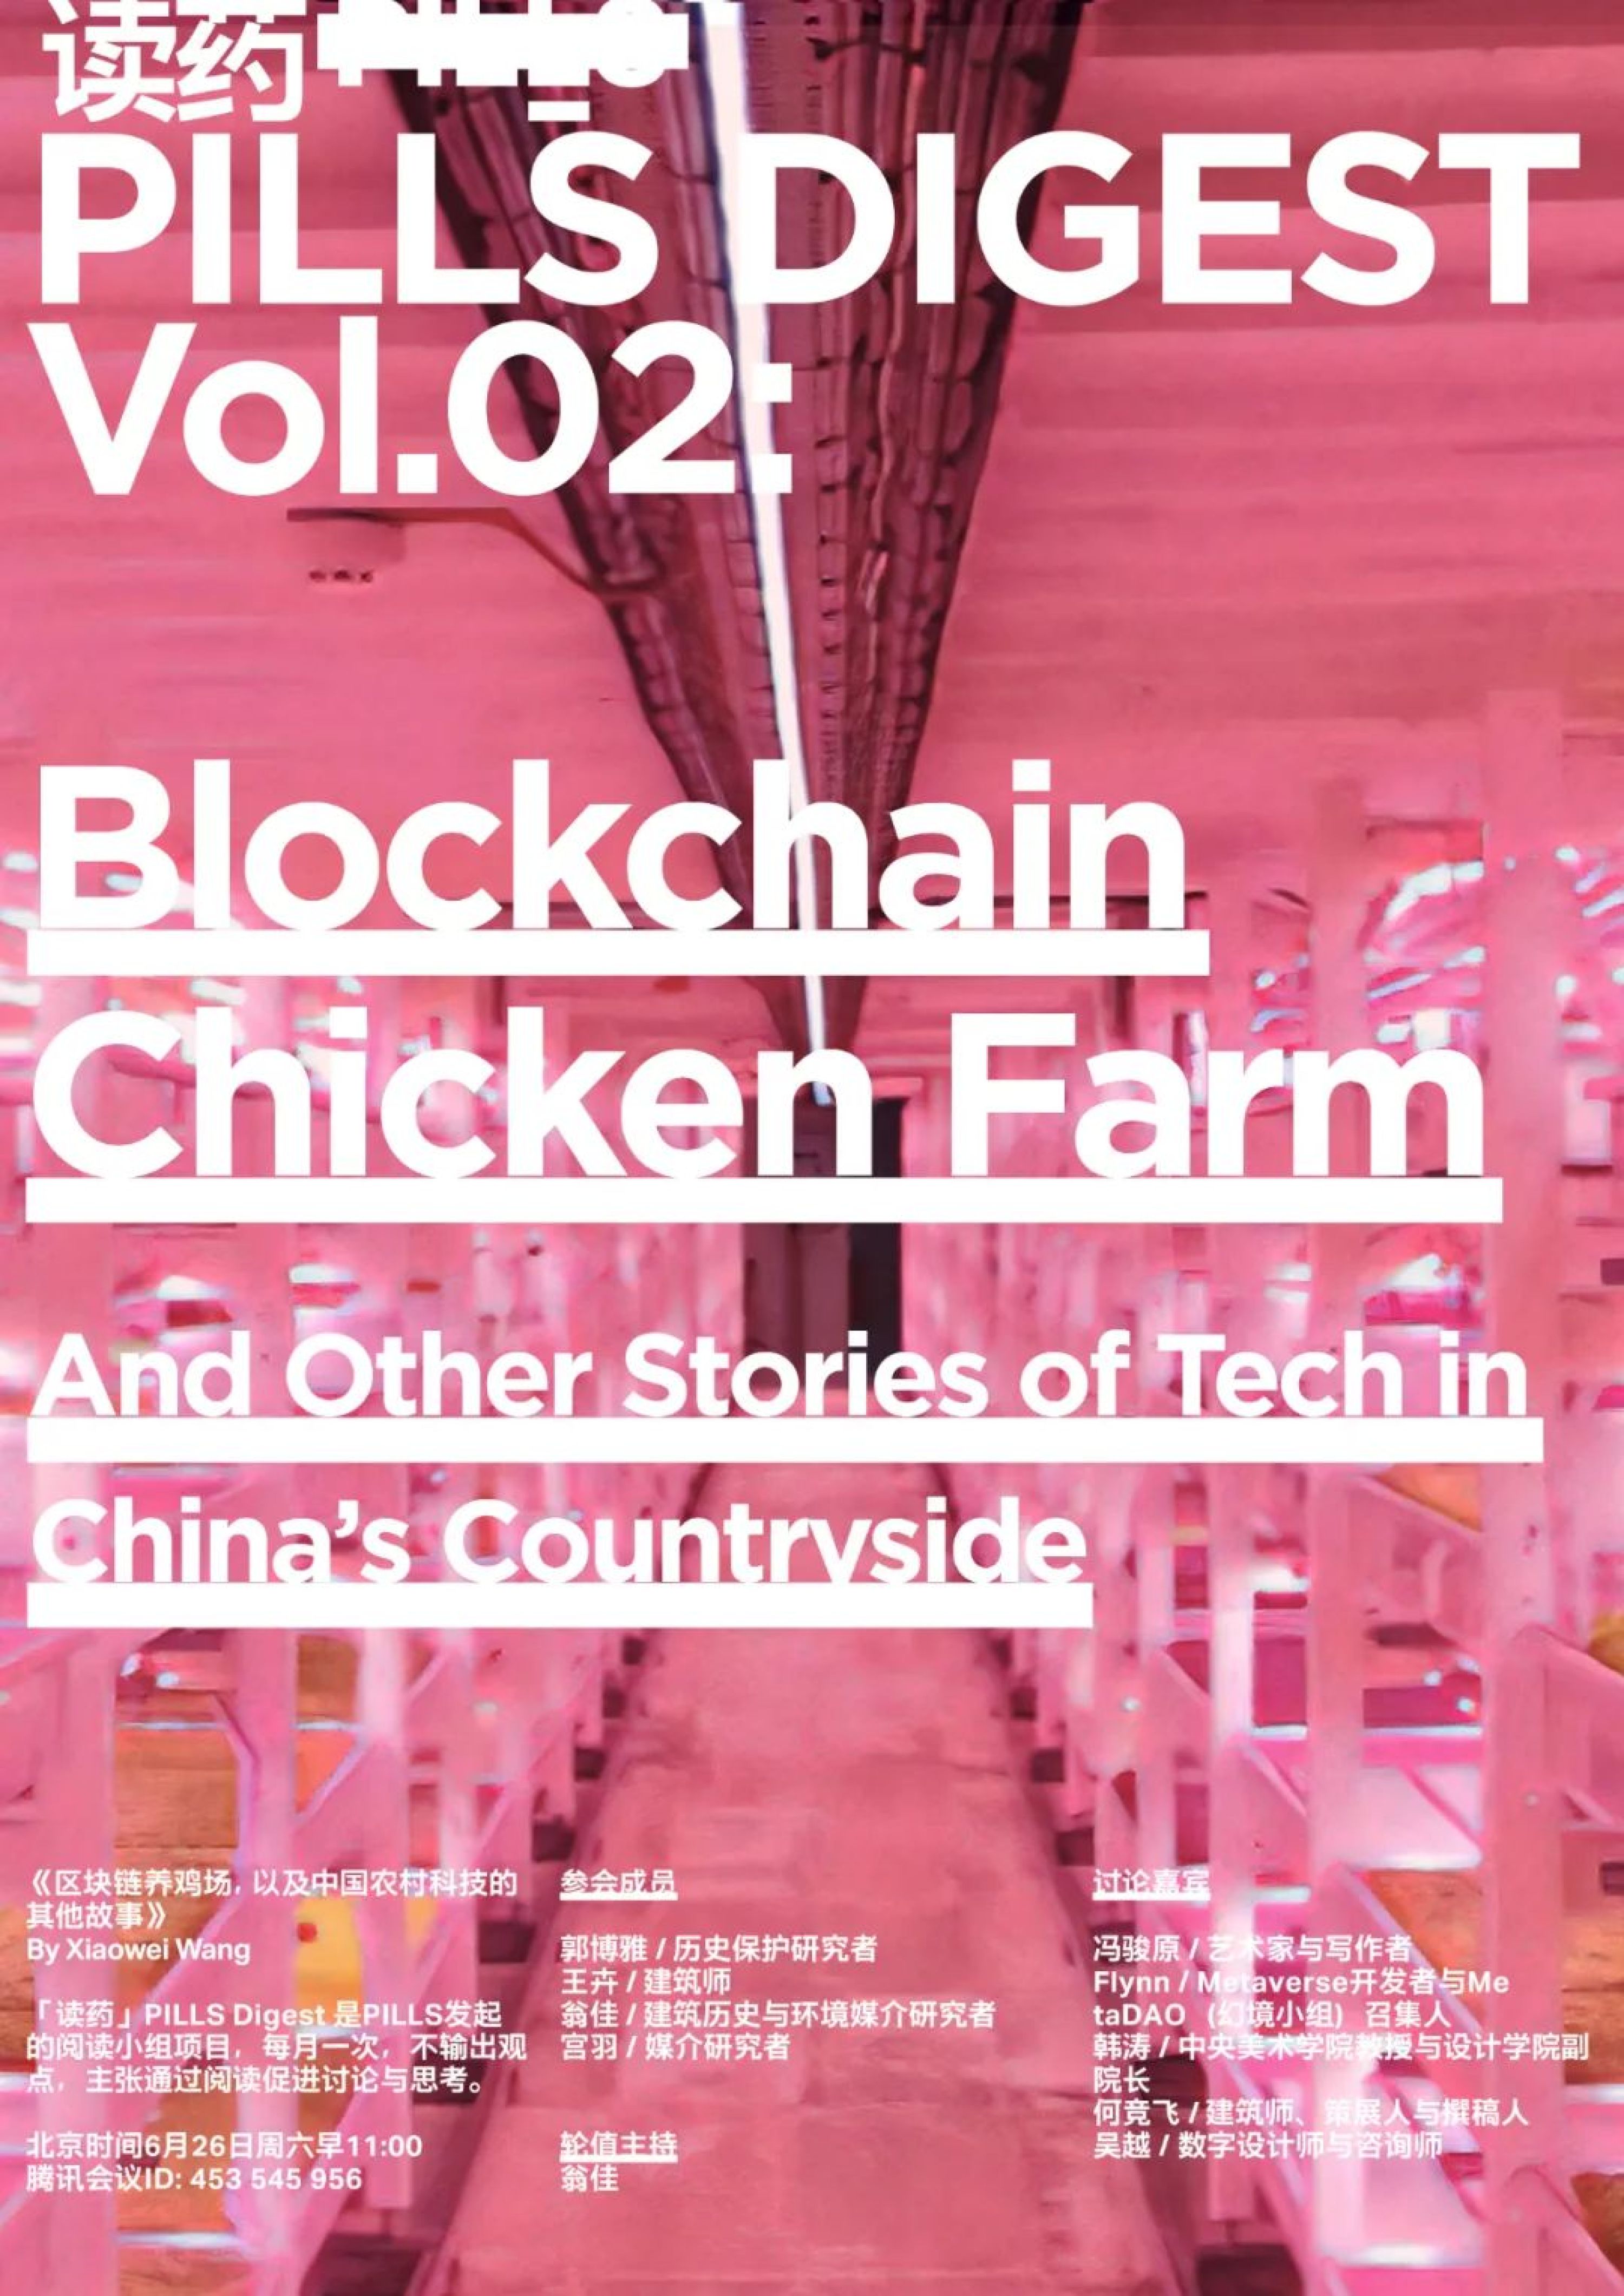 PILLS Held a Reading Activity PILLS Digest Vol.02 “Blockchain Chicken Farm and Other Stories of Tech in China’s Countryside"